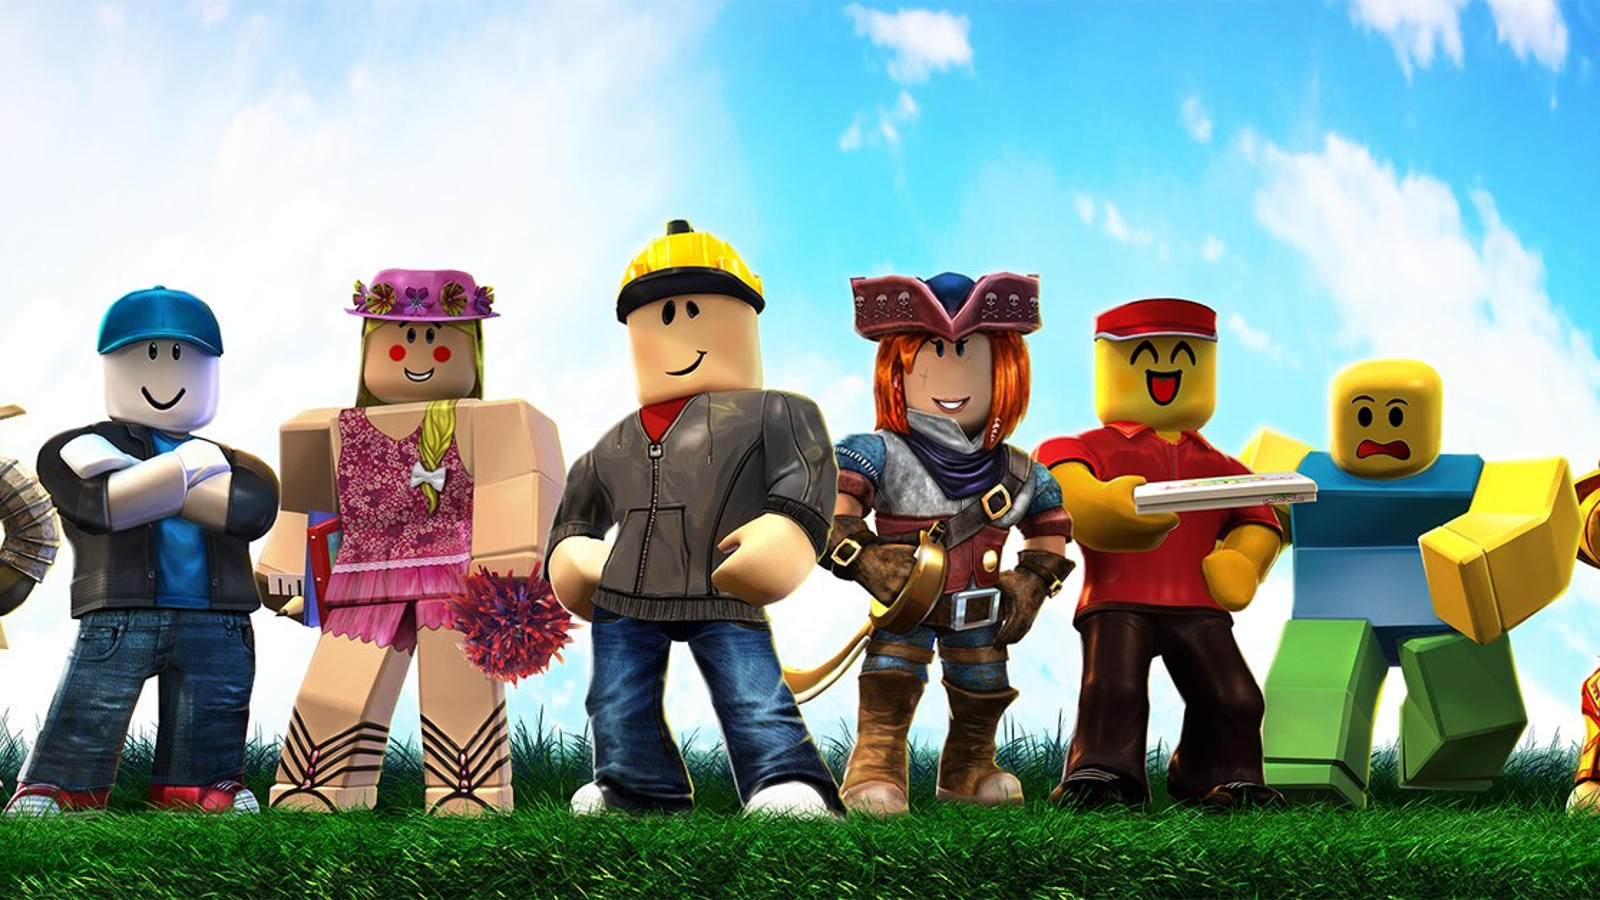 Roblox developers set to earn $250 million in 2020